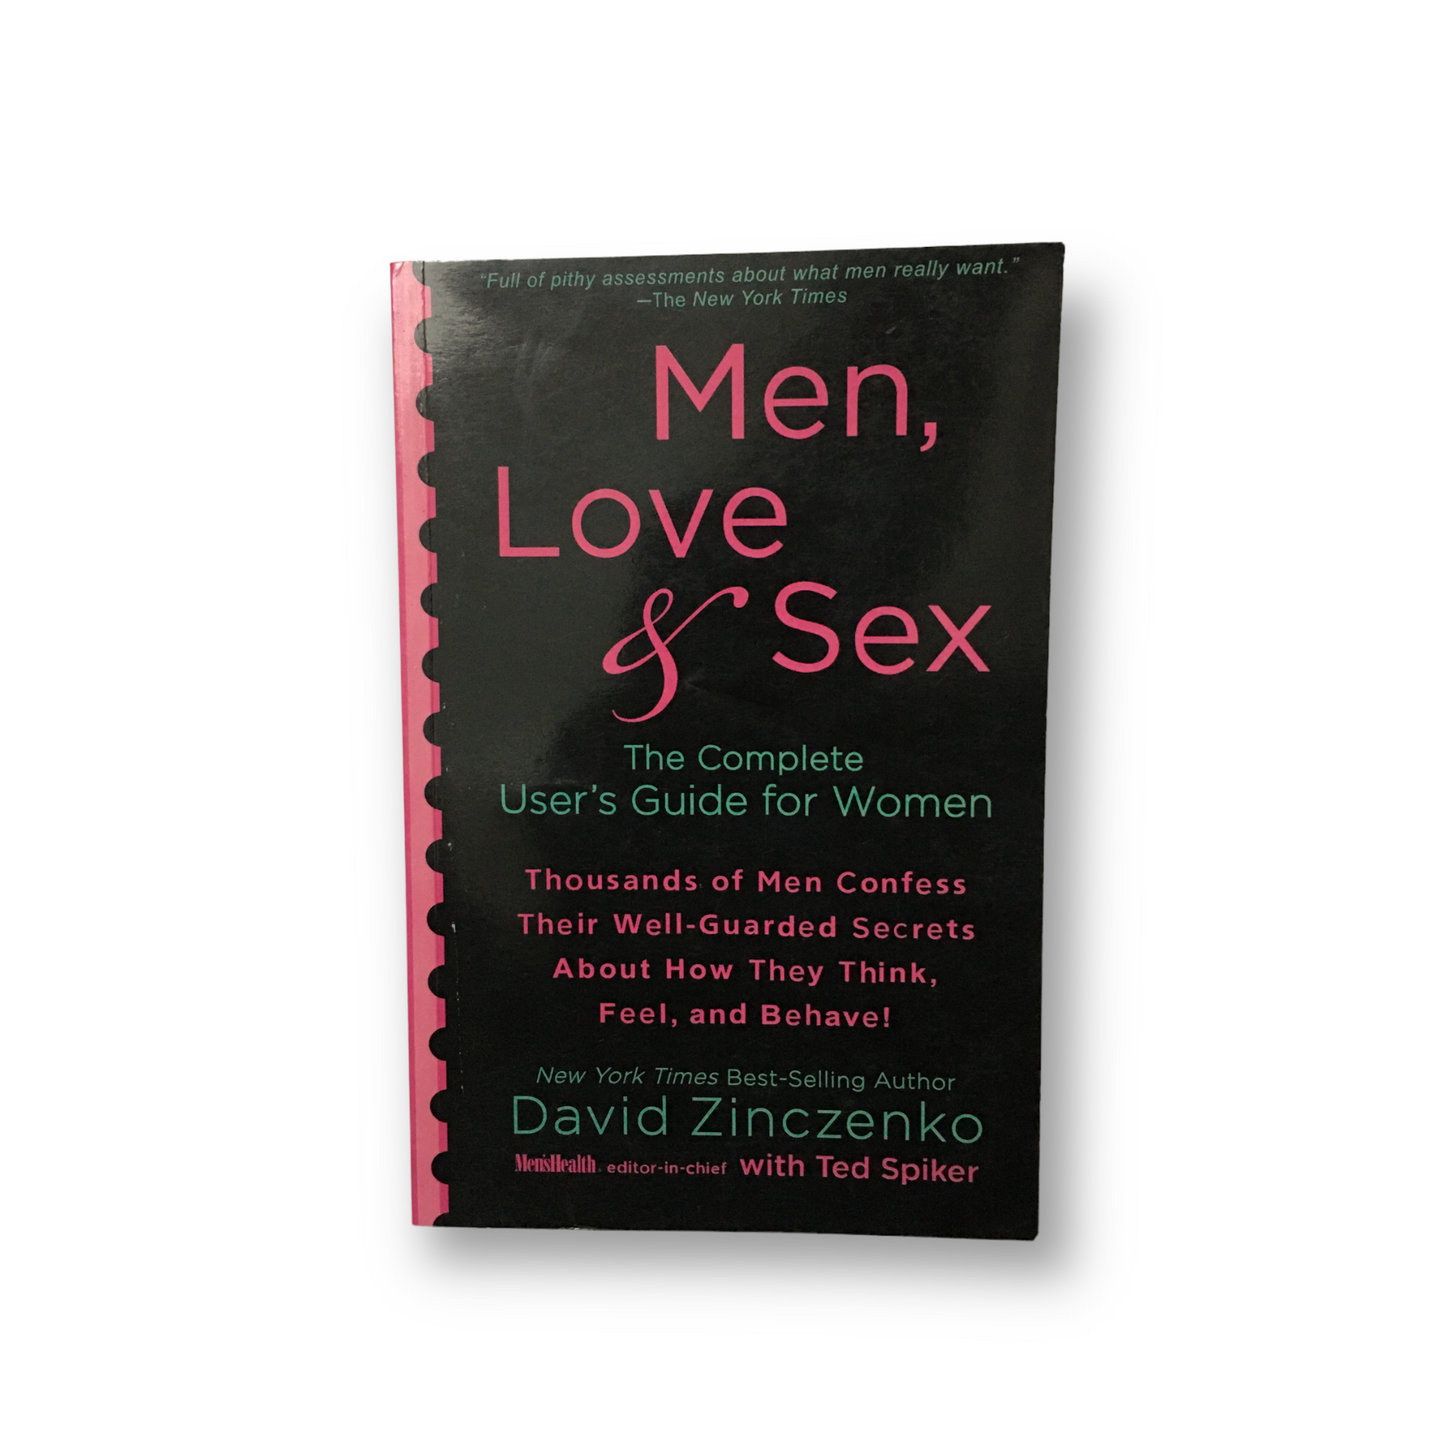 Men, Love and Sex